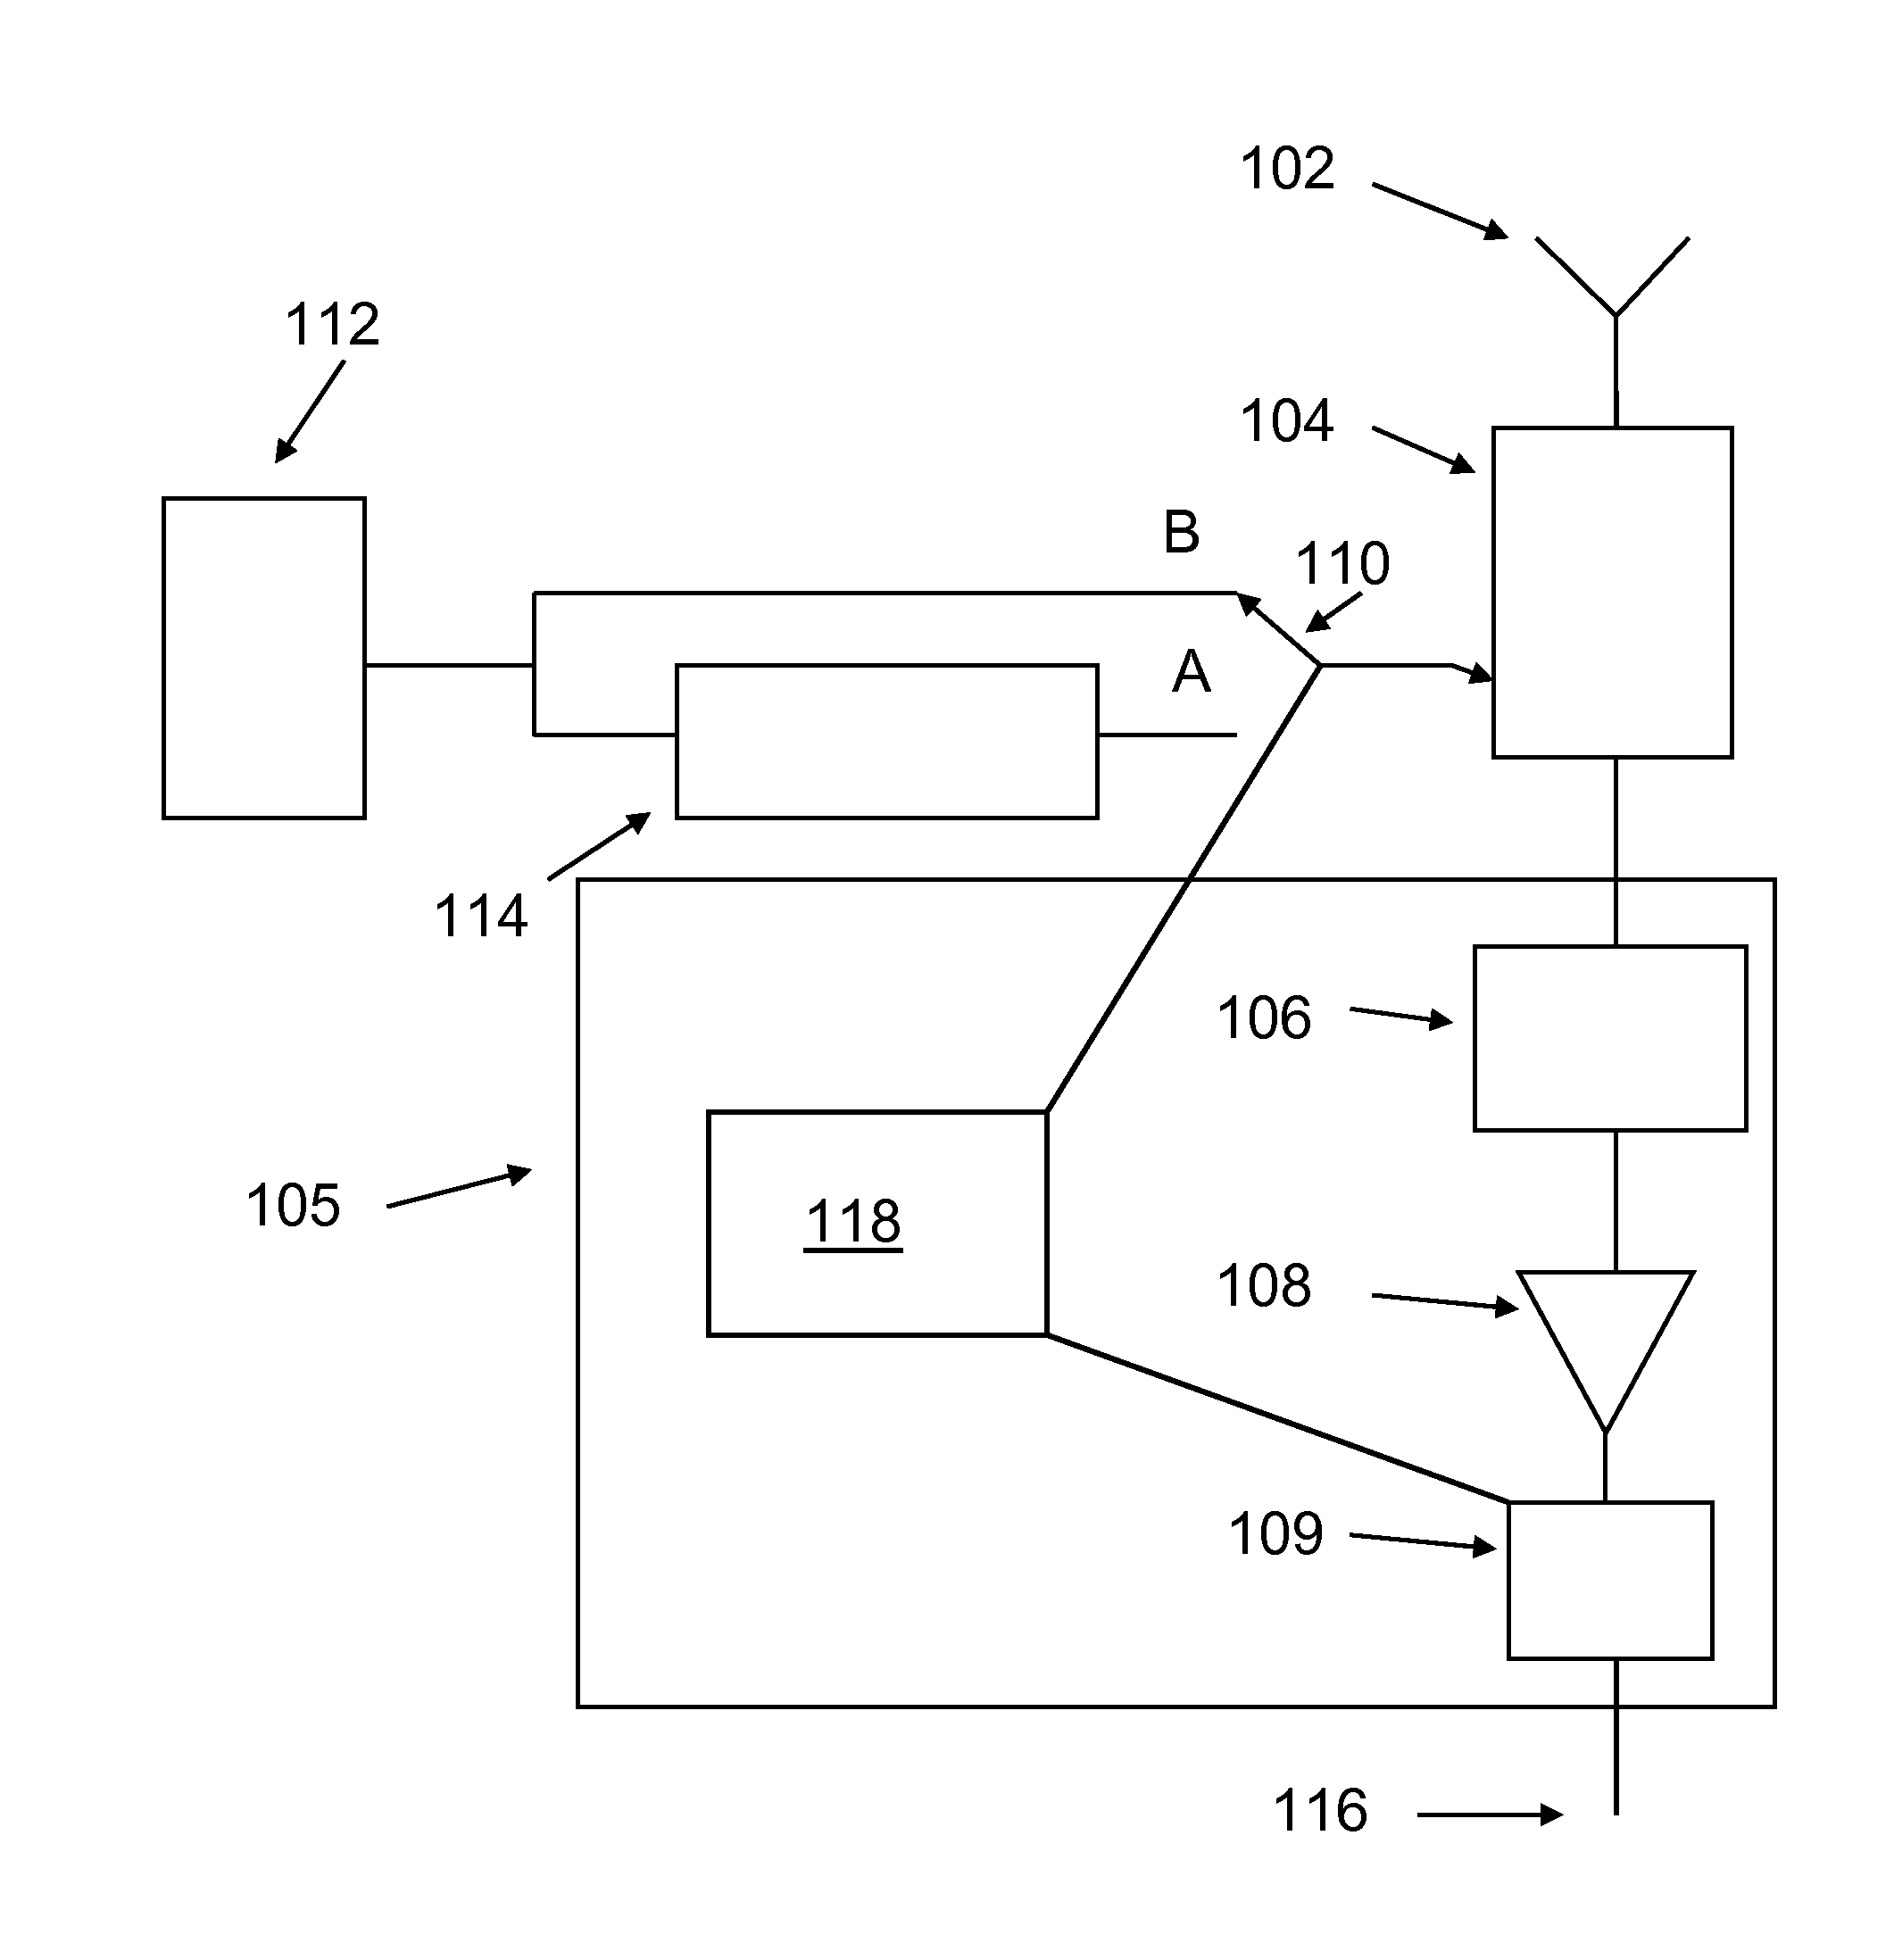 Method to measure total noise temperature of a wireless receiver during operation